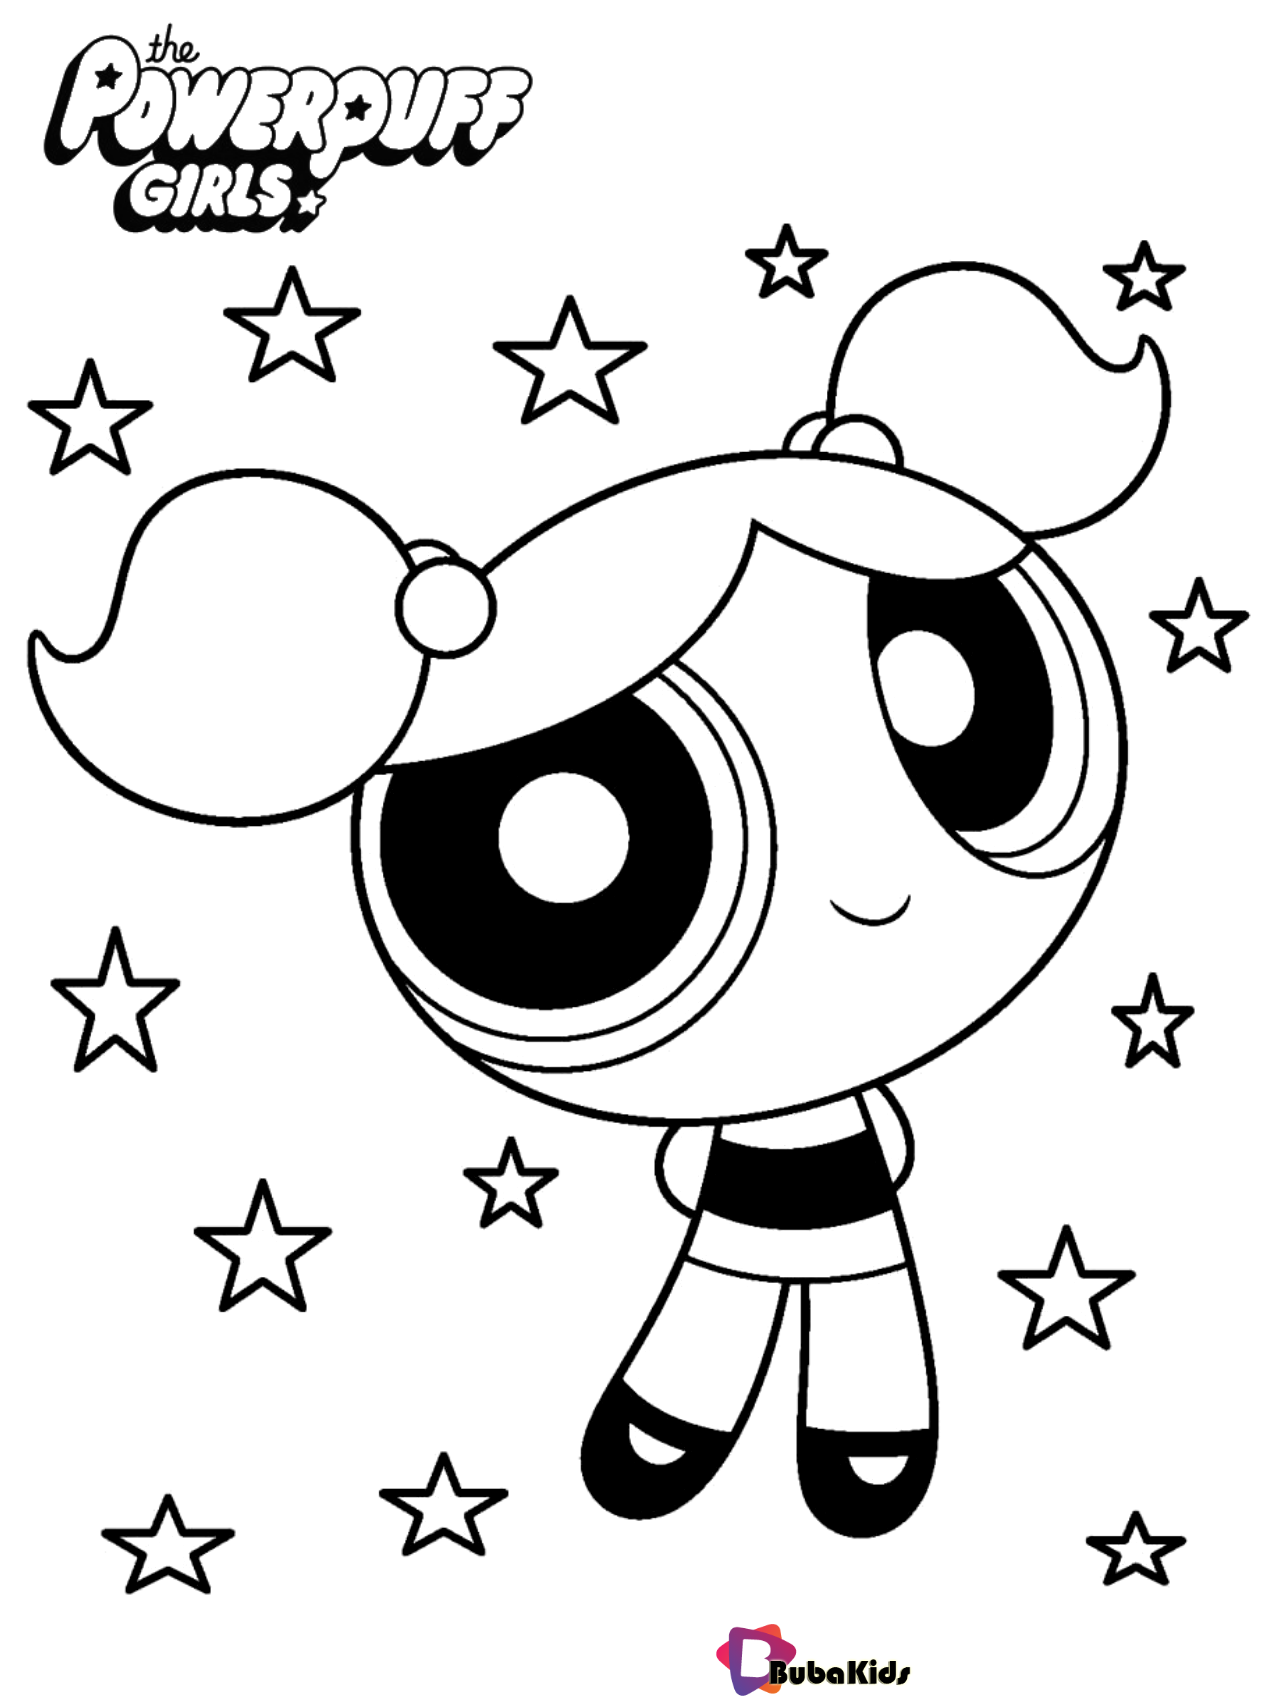 Bubbles The Powerpuff Girls character coloring page Wallpaper